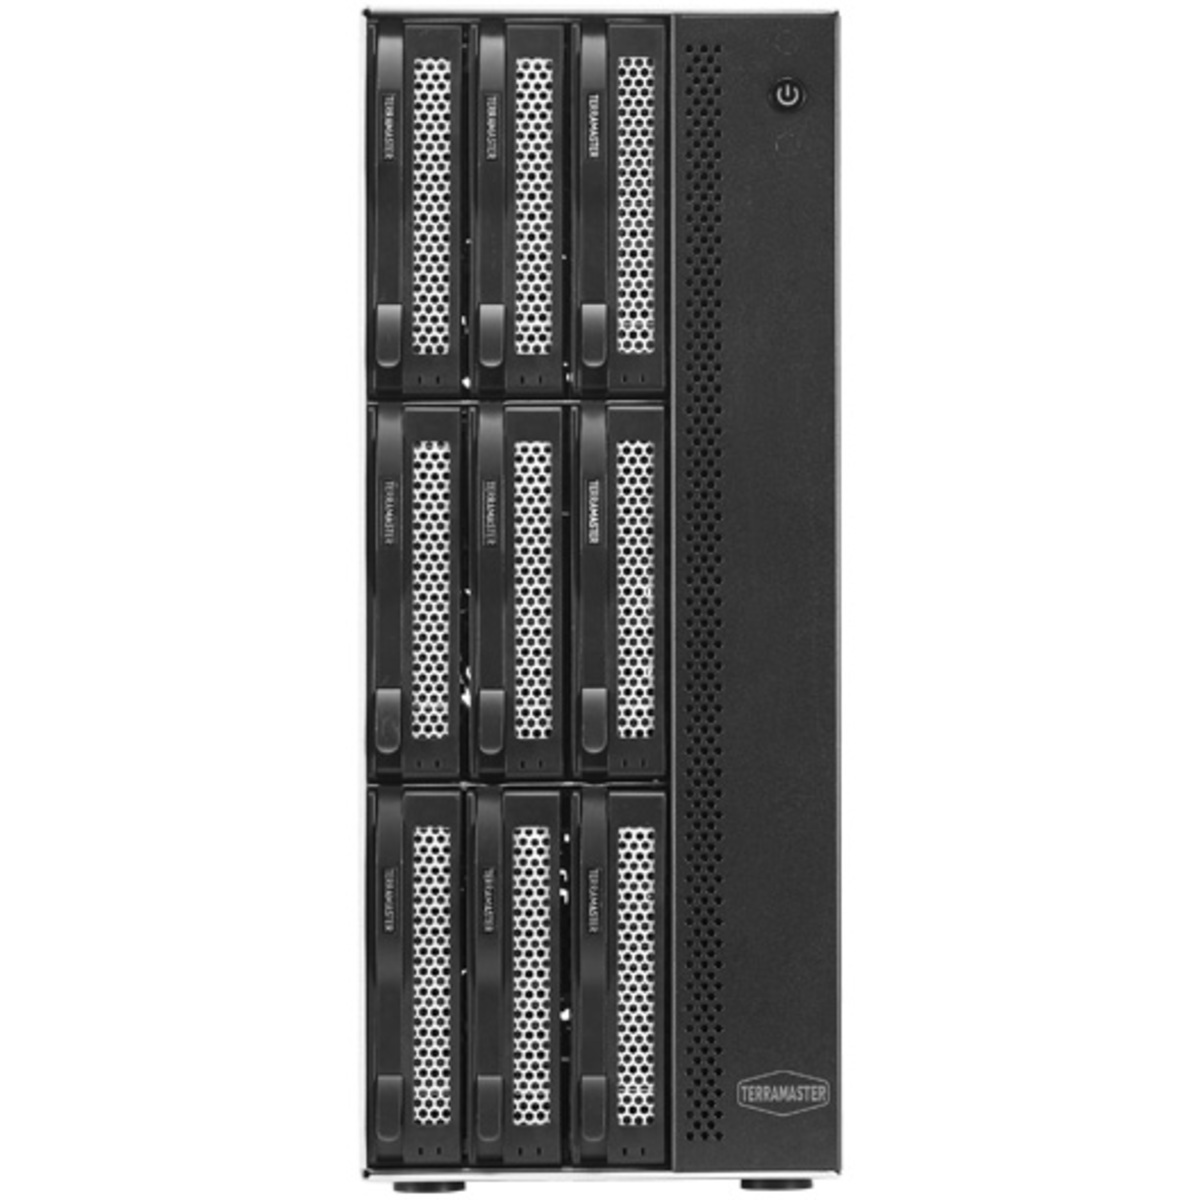 TerraMaster T9-450 36tb 9-Bay Desktop Multimedia / Power User / Business NAS - Network Attached Storage Device 6x6tb Seagate EXOS 7E10 ST6000NM019B 3.5 7200rpm SATA 6Gb/s HDD ENTERPRISE Class Drives Installed - Burn-In Tested T9-450